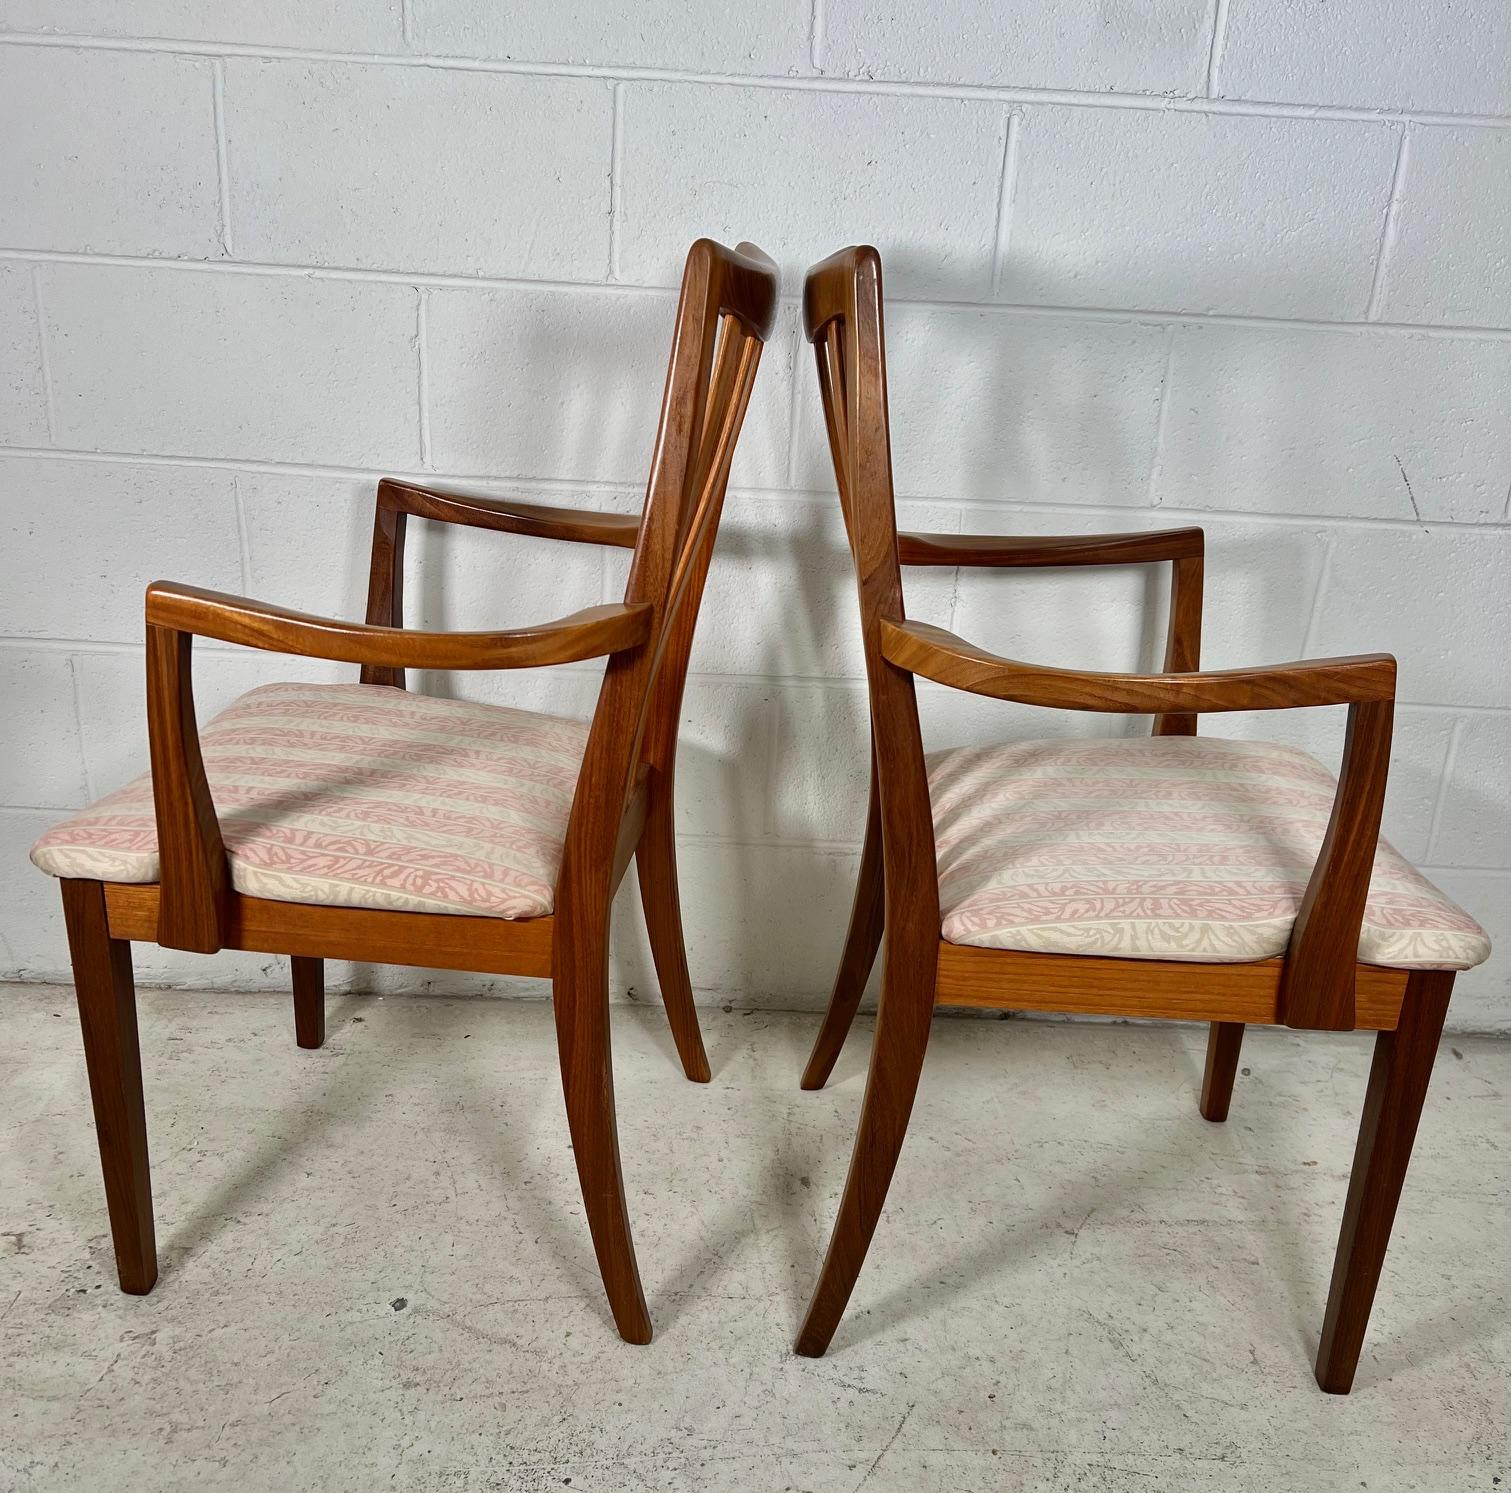 Set Of 6 Mid Century Modern Teak Chairs By G Plan Slat Back  2 With Arms 12